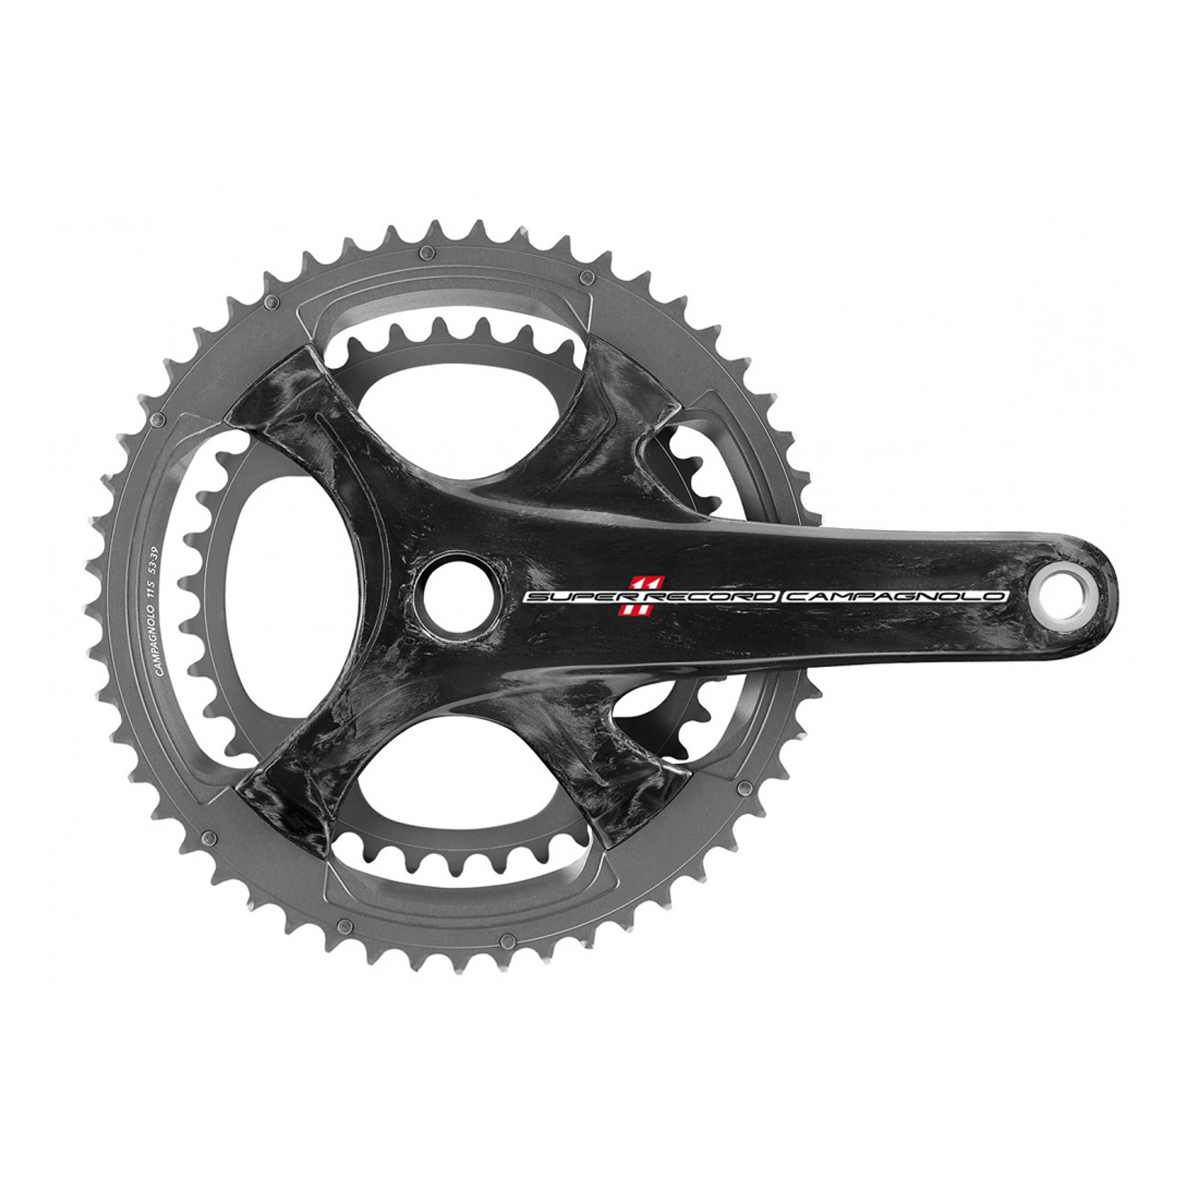 CAMPAGNOLO Super Record Chainset Ti Carbon Ct Ultra Torque 11 Speed 175mm 50-34t (A)